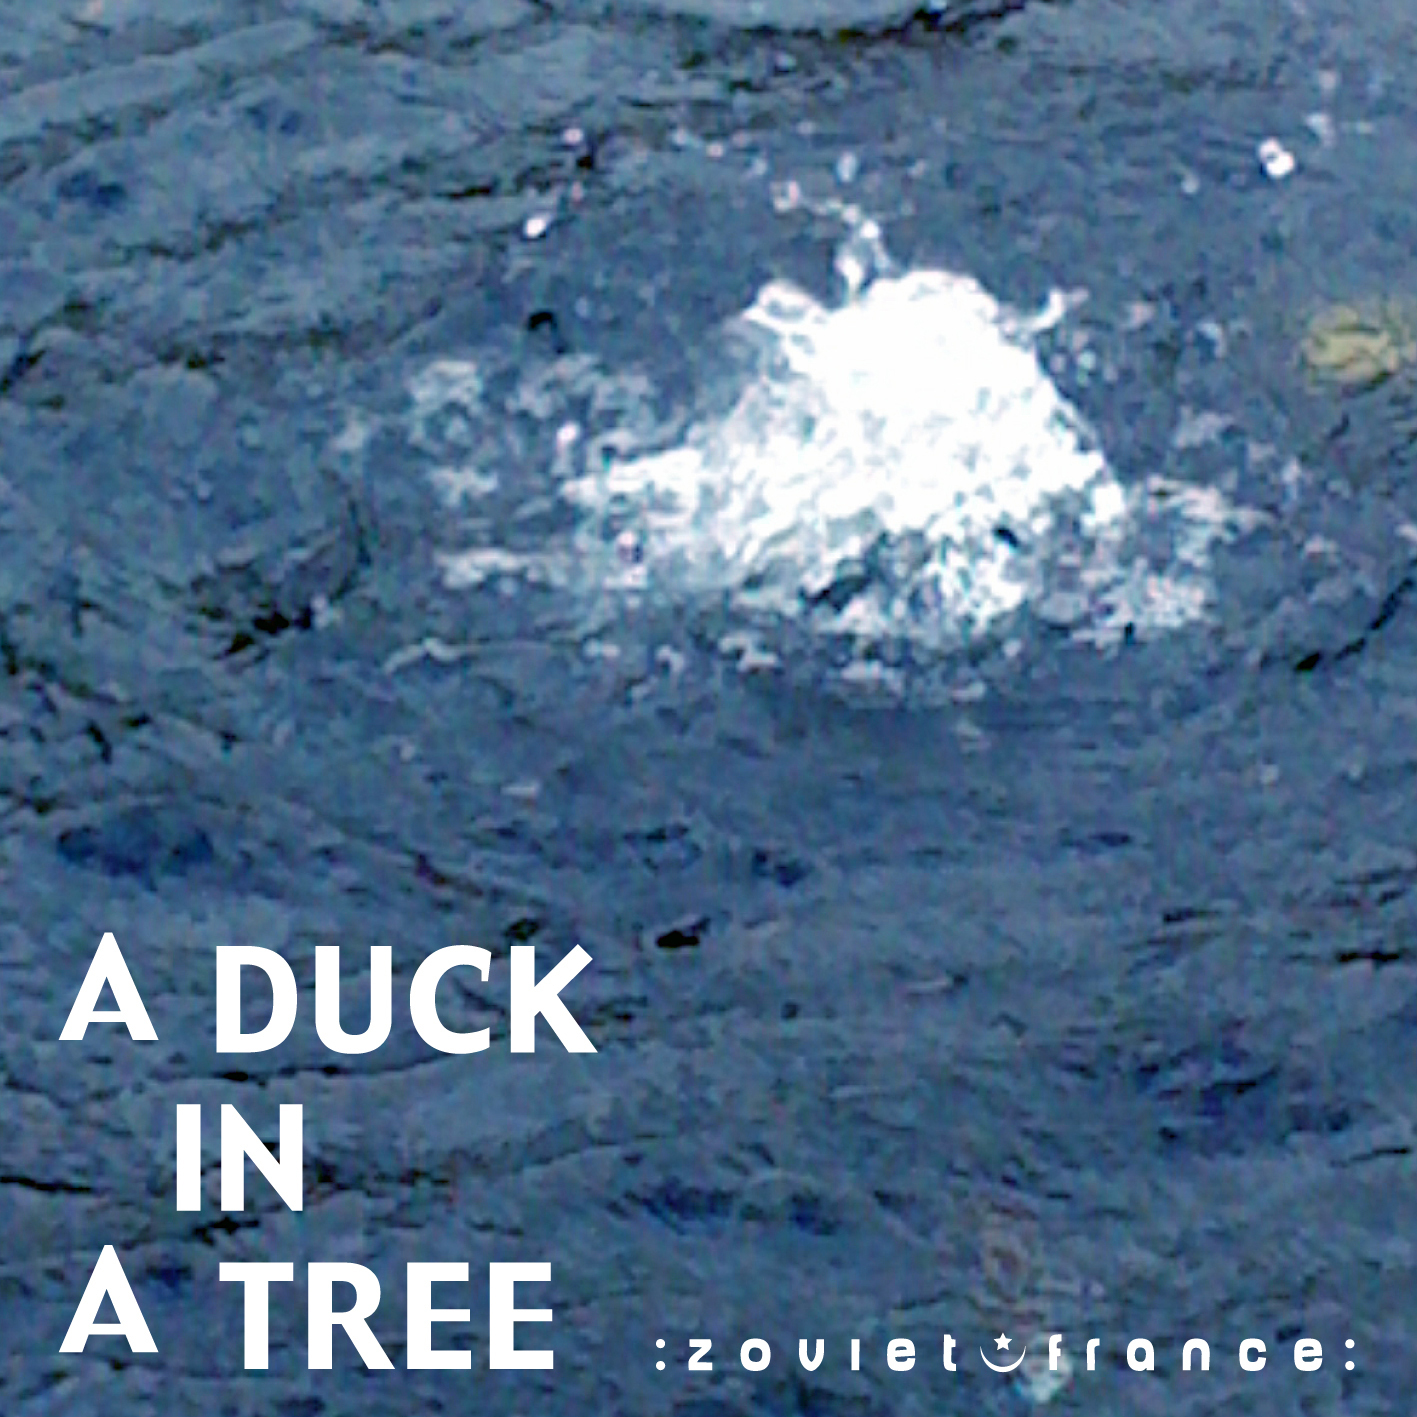 A-Duck-in-a-Tree-2012-10-20-_-Sustained-with-Silence-and-Water-layout.jpg